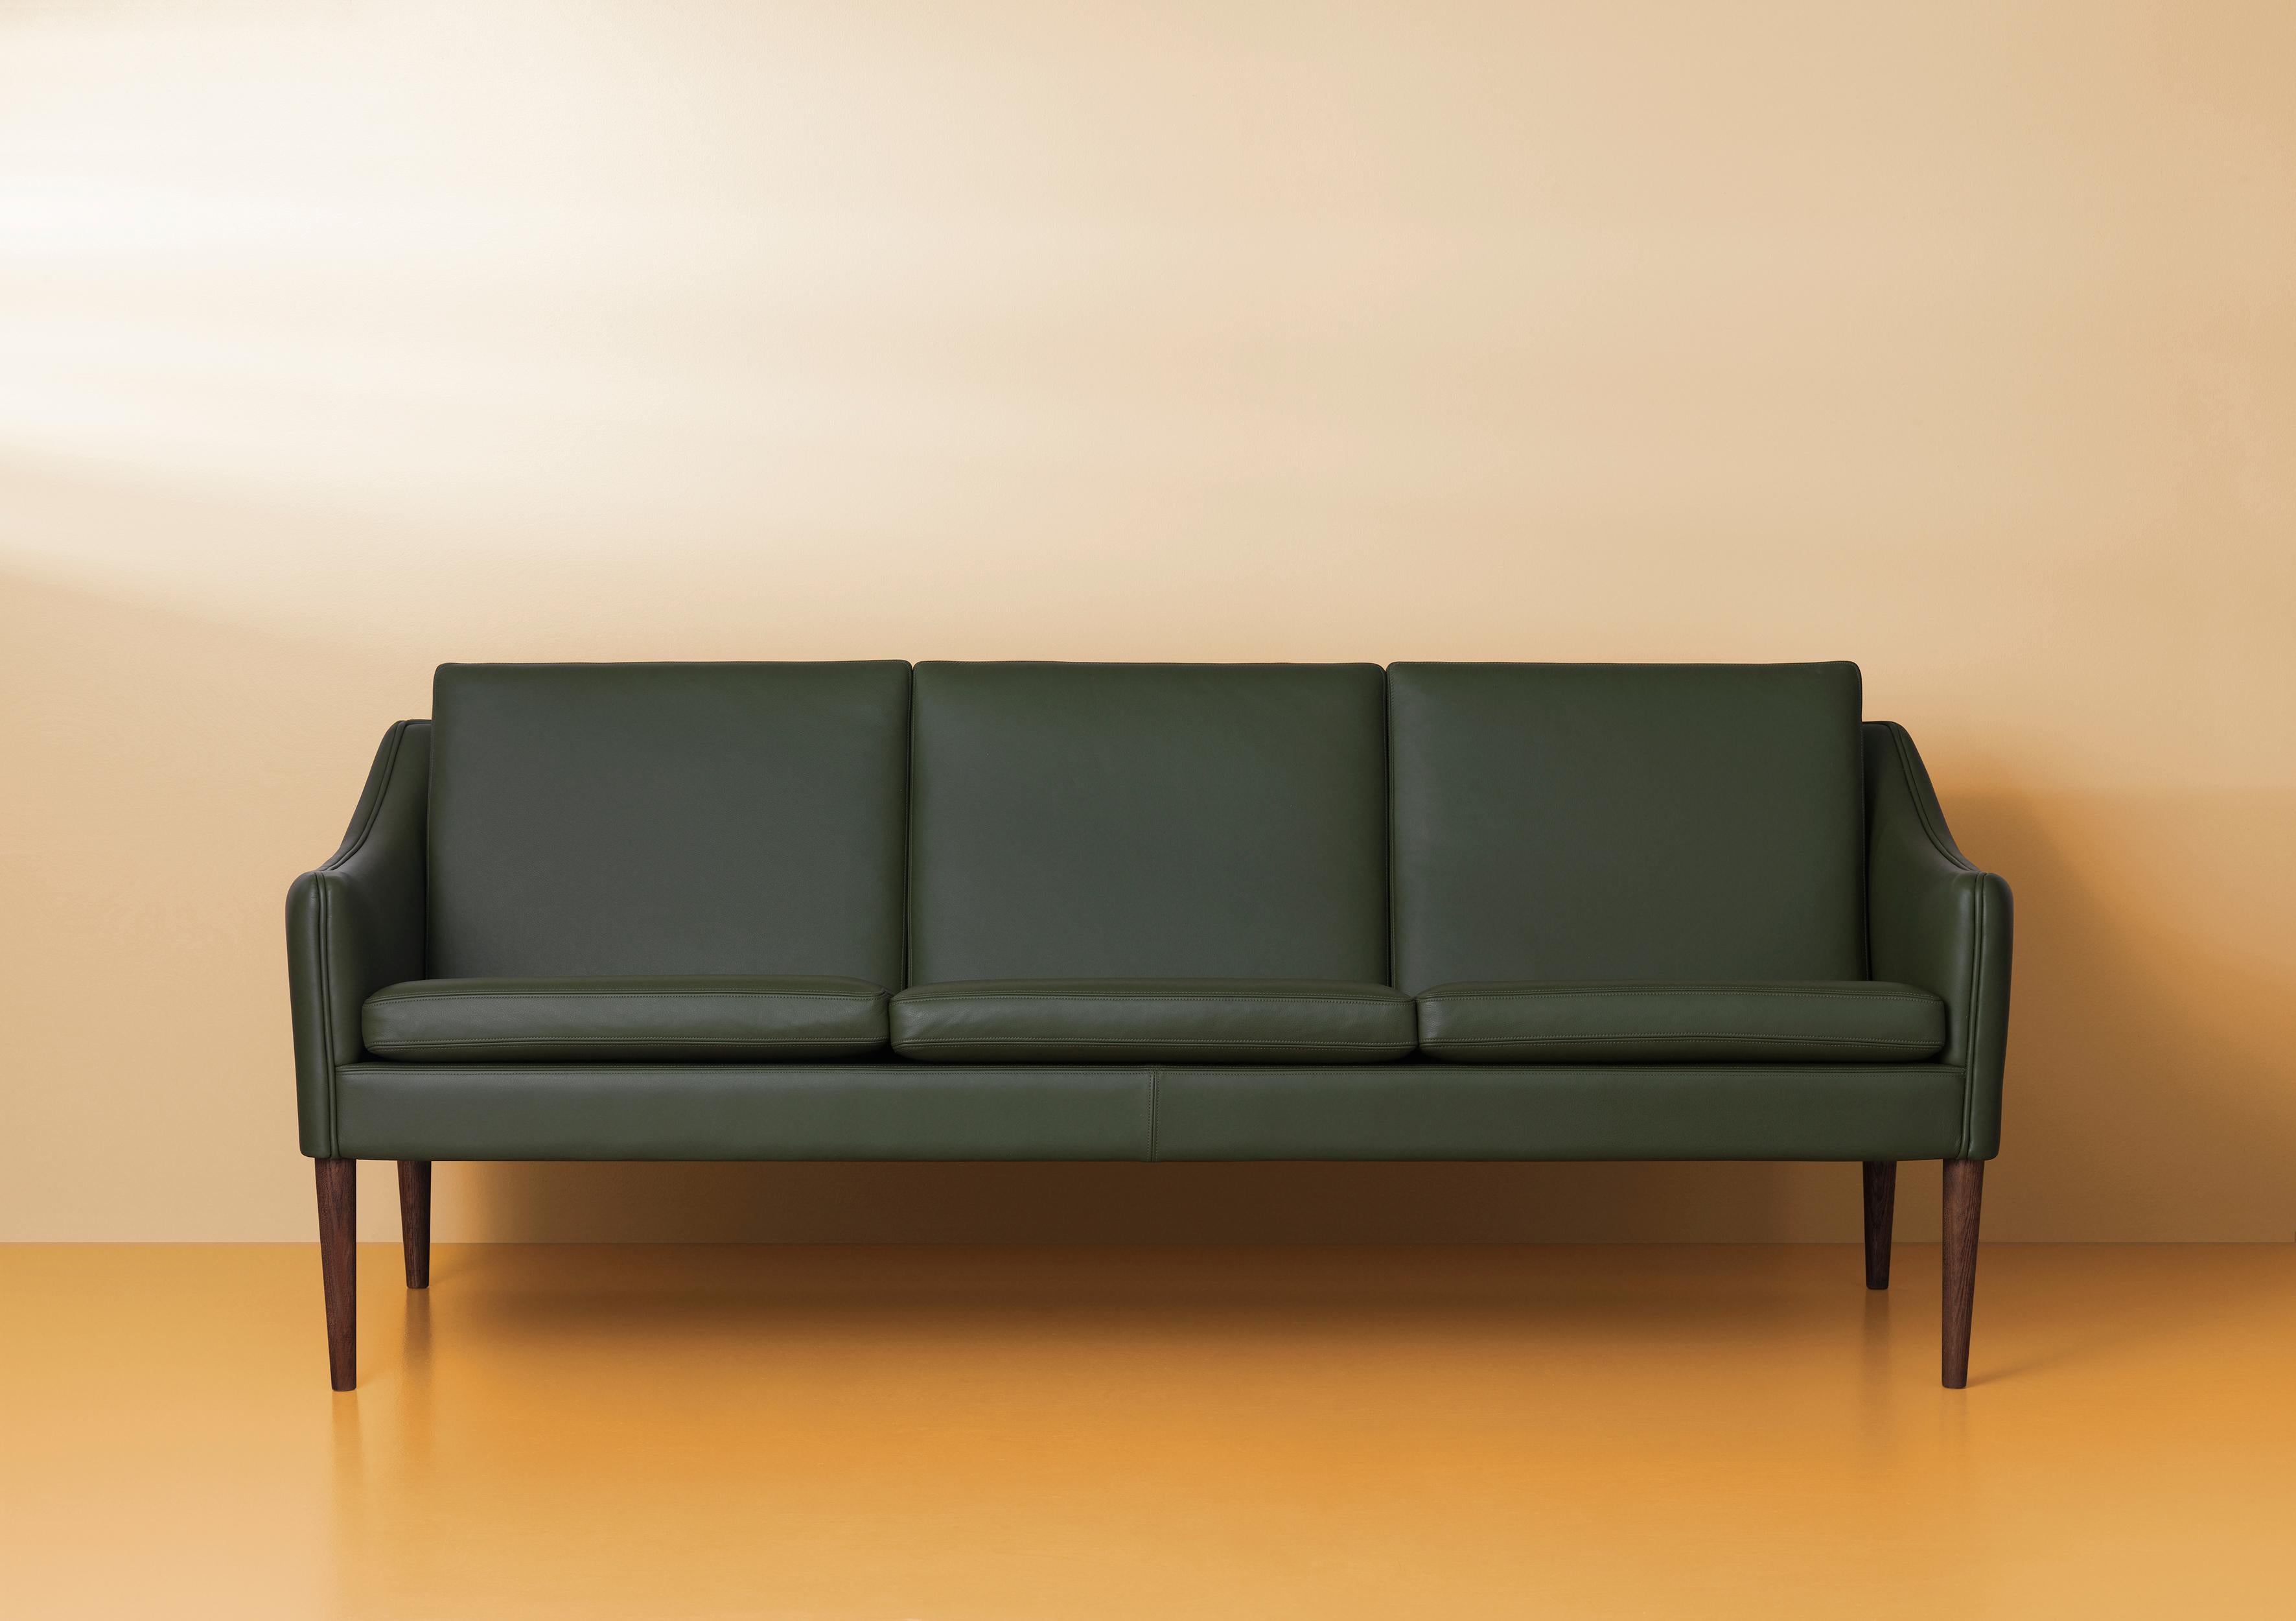 Contemporary Mr. Olsen 3-Seat Sofa with Walnut Legs, by Hans Olsen from Warm Nordic For Sale